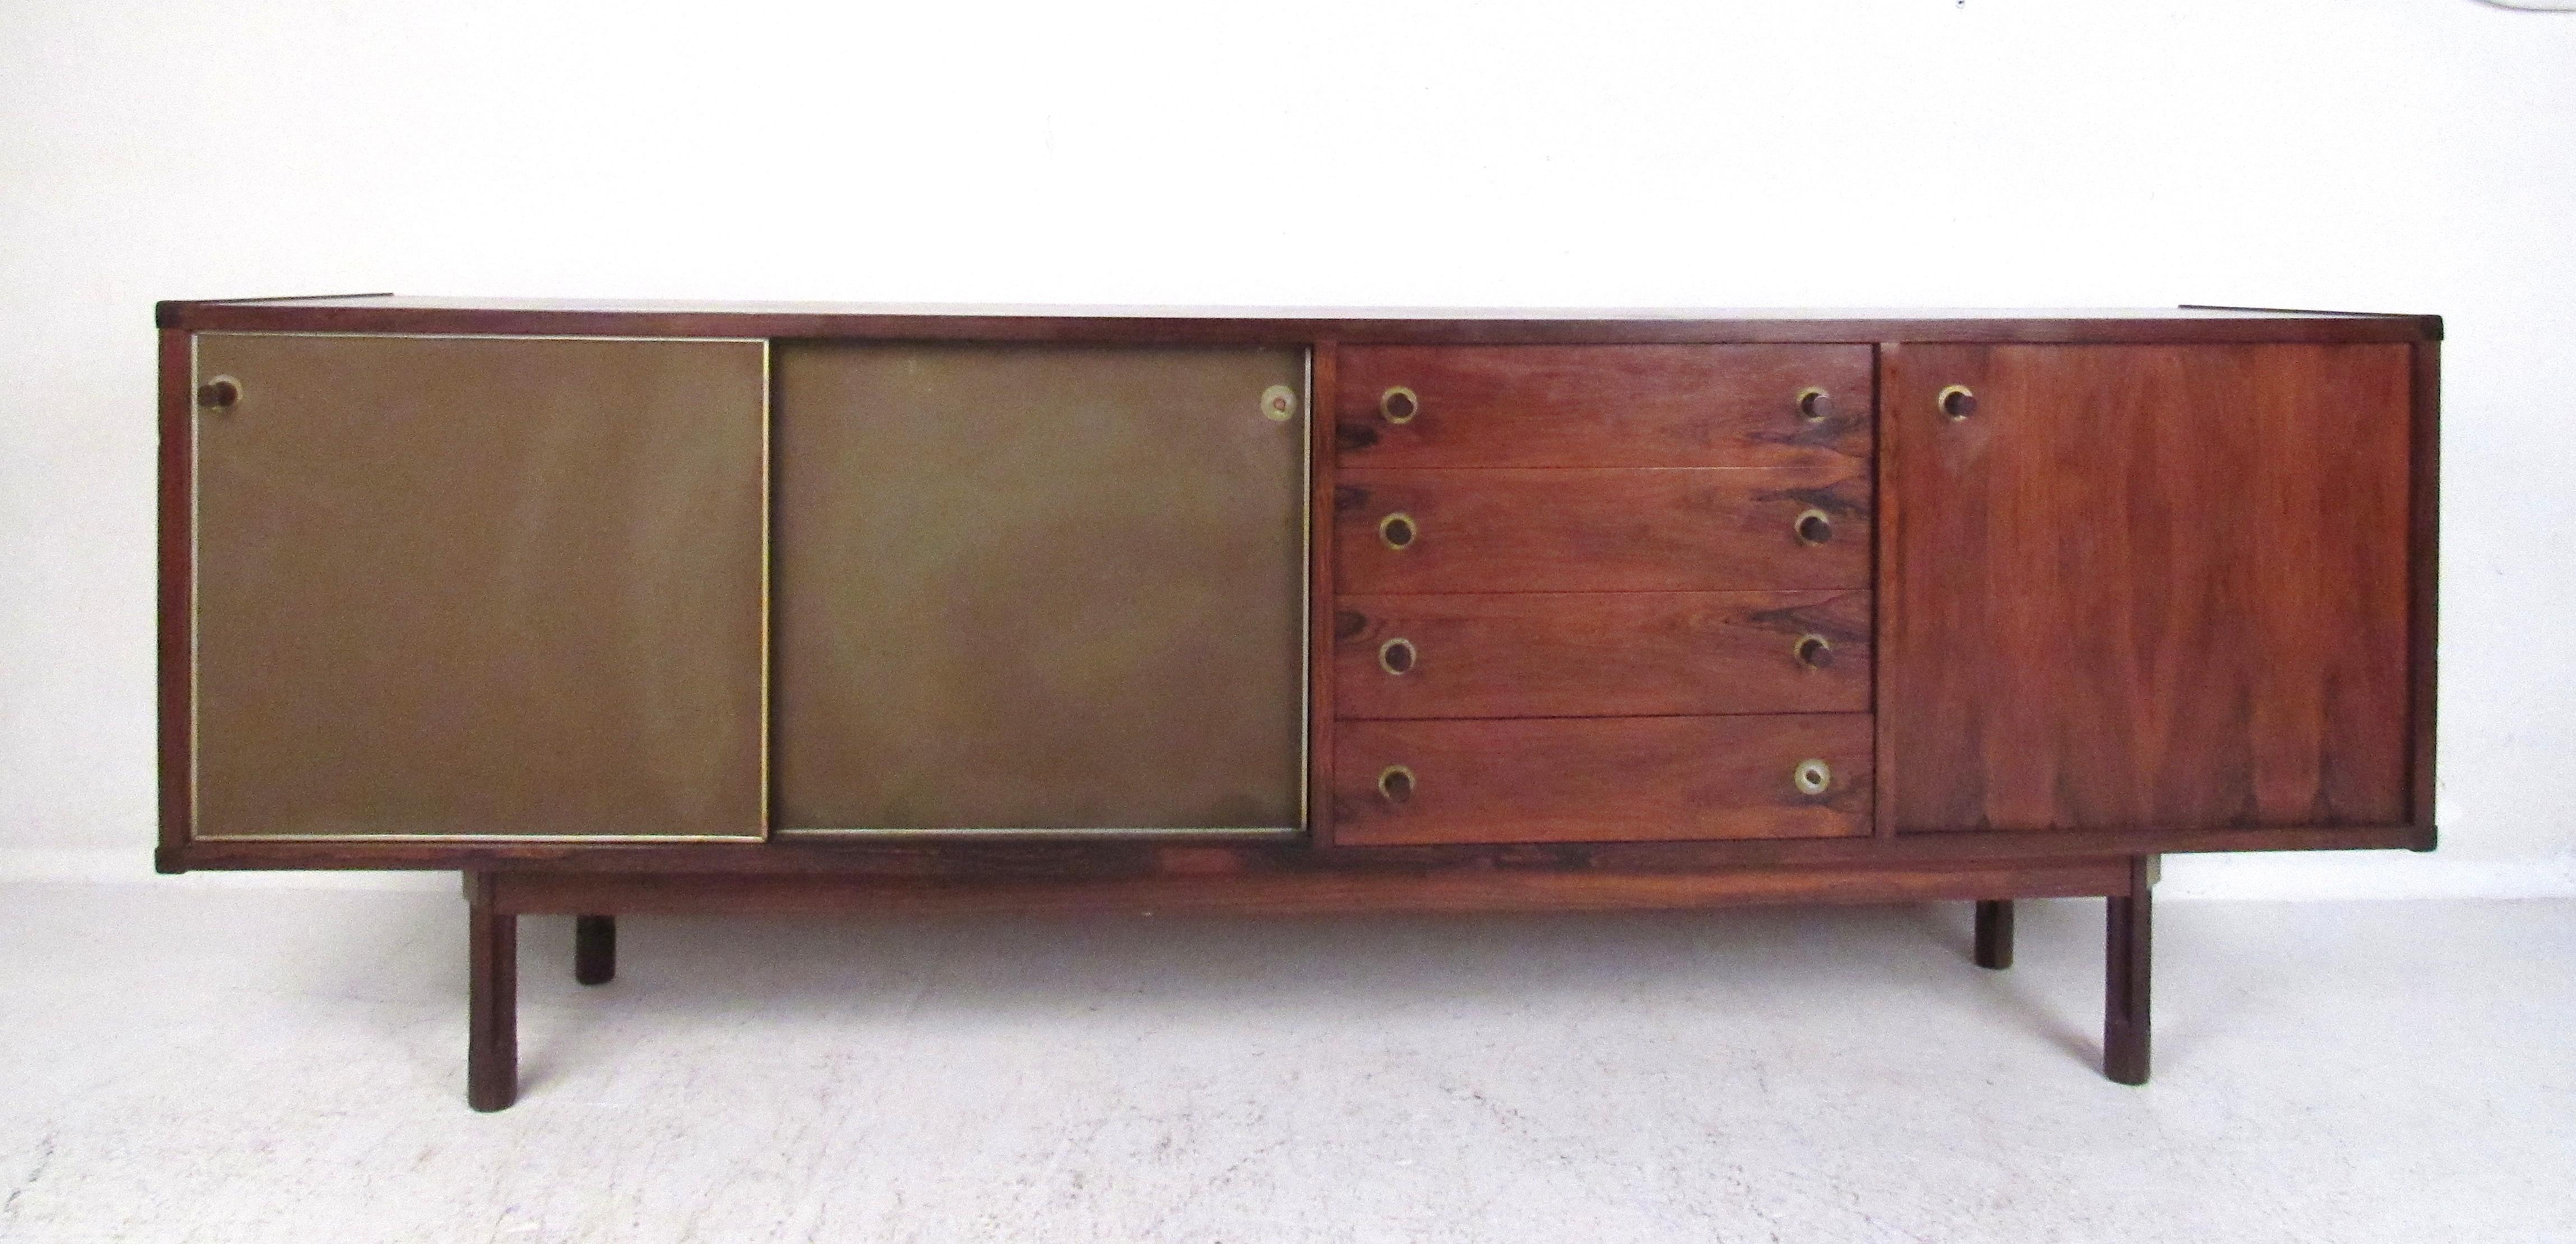 Beautiful midcentury Italian credenza or sideboard covered in a rich rosewood veneer. Sliding cabinet doors along with four drawers in the center offer ample room for storage. The piece's finished back allows it to be admired from all angles.